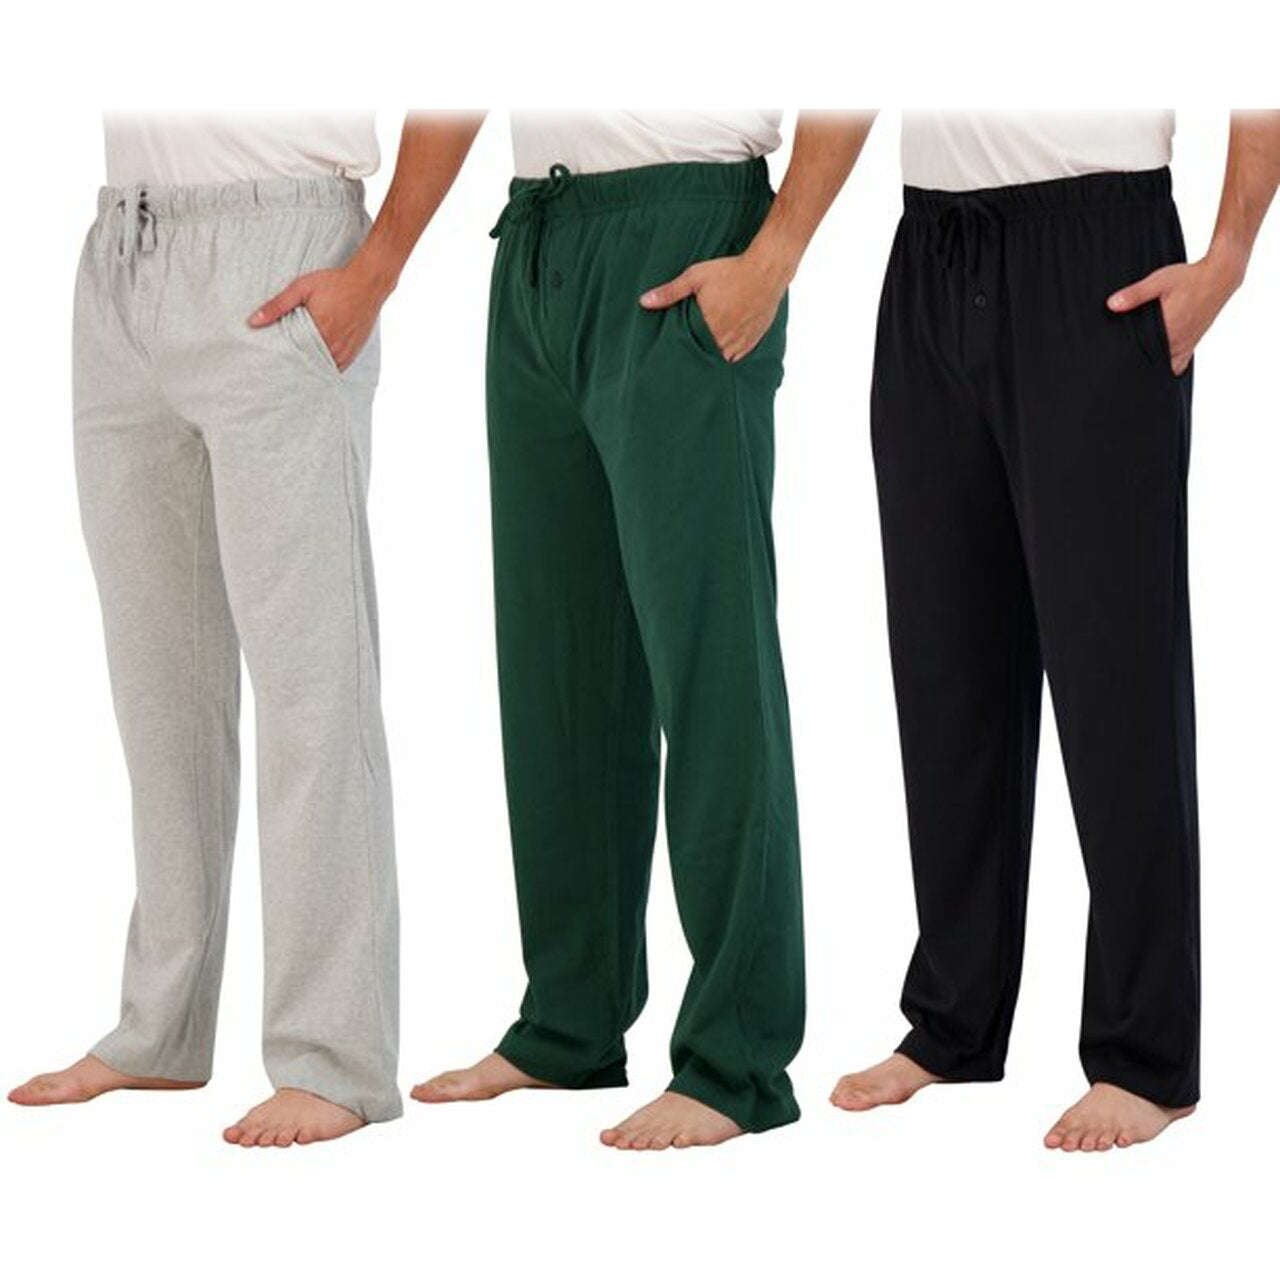 Image of 3-Pack: Men's Cotton Lounge Pajama Pants with Pockets